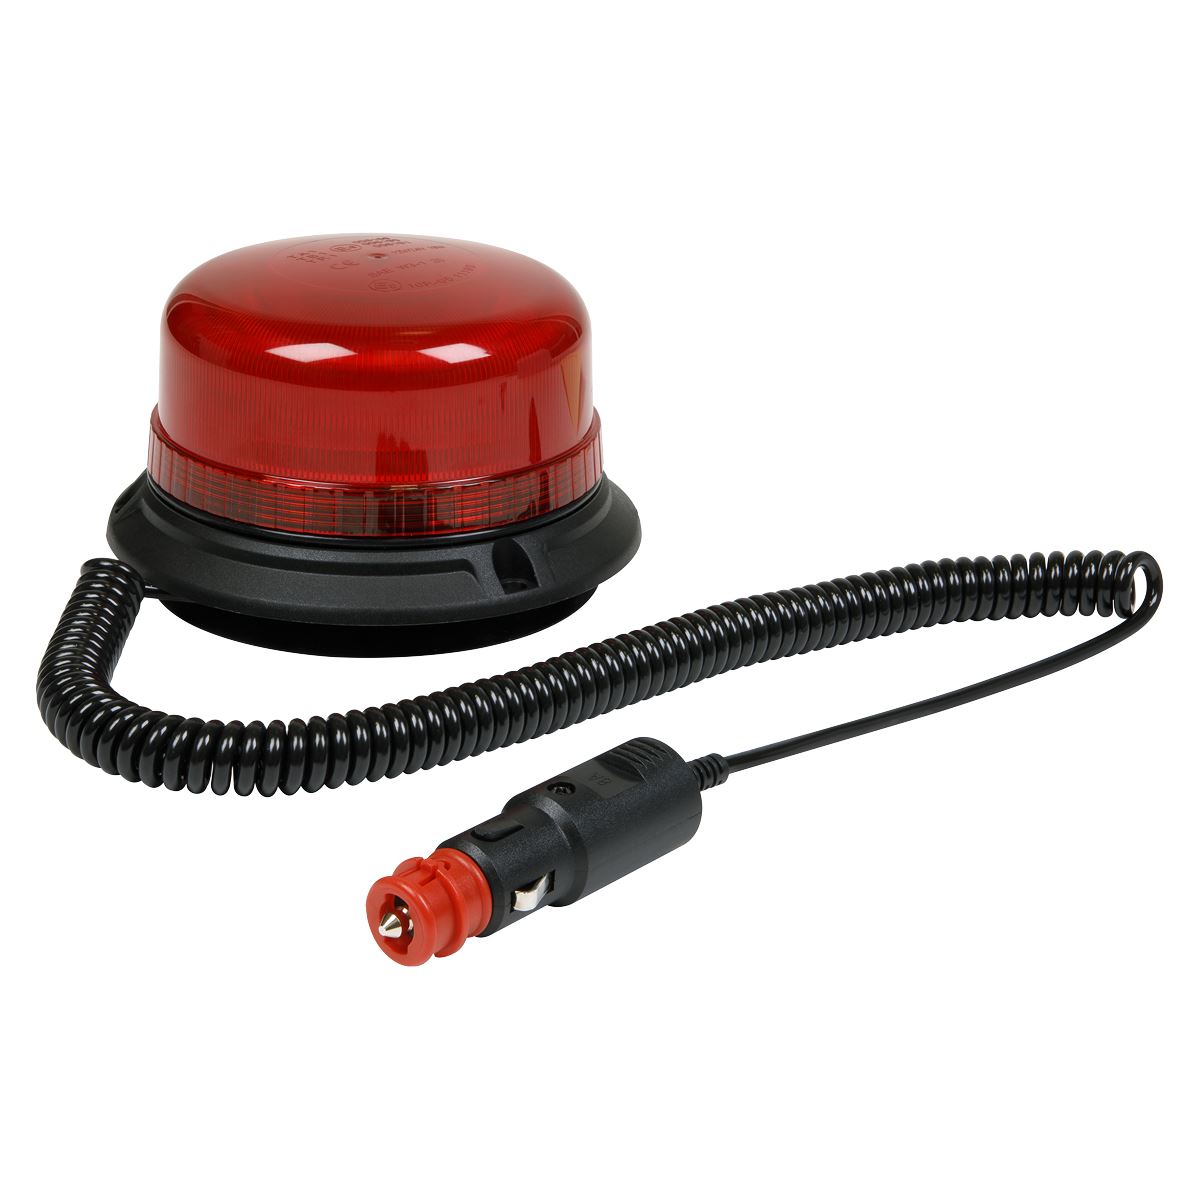 Sealey Warning Beacon SMD LED 12/24V Magnetic Fixing - Red